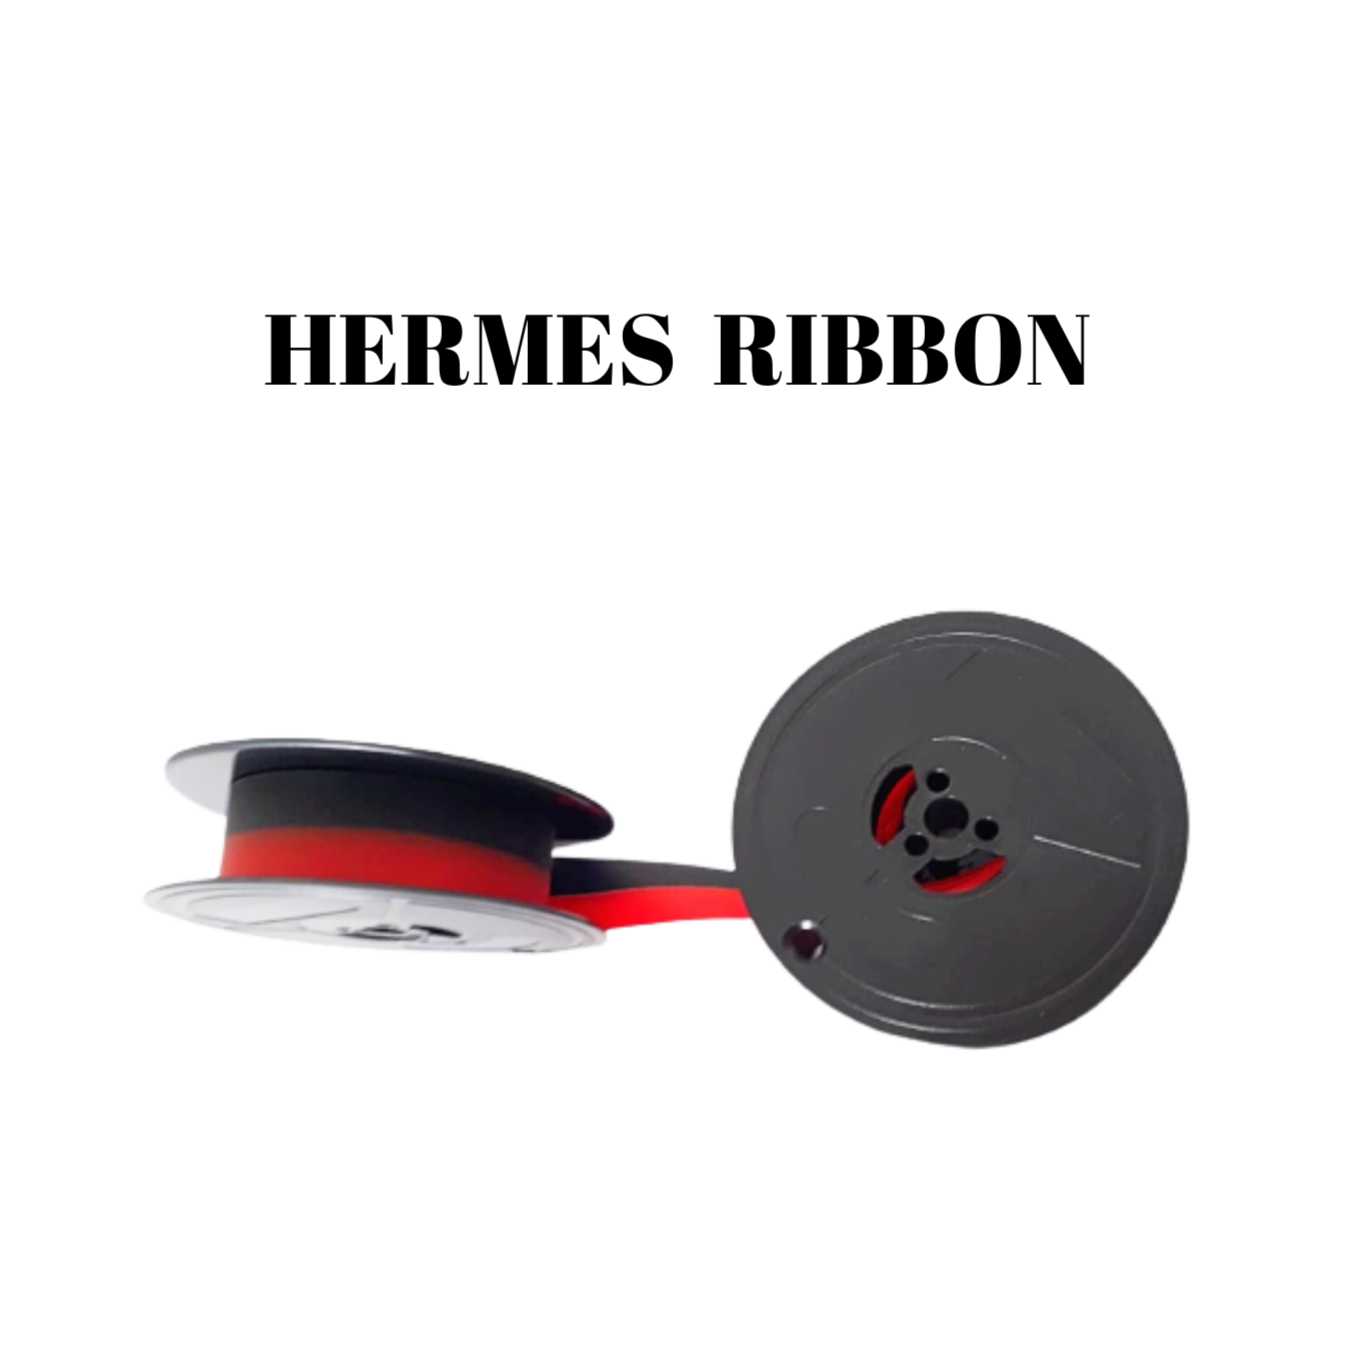 Different Hermes Ribbons